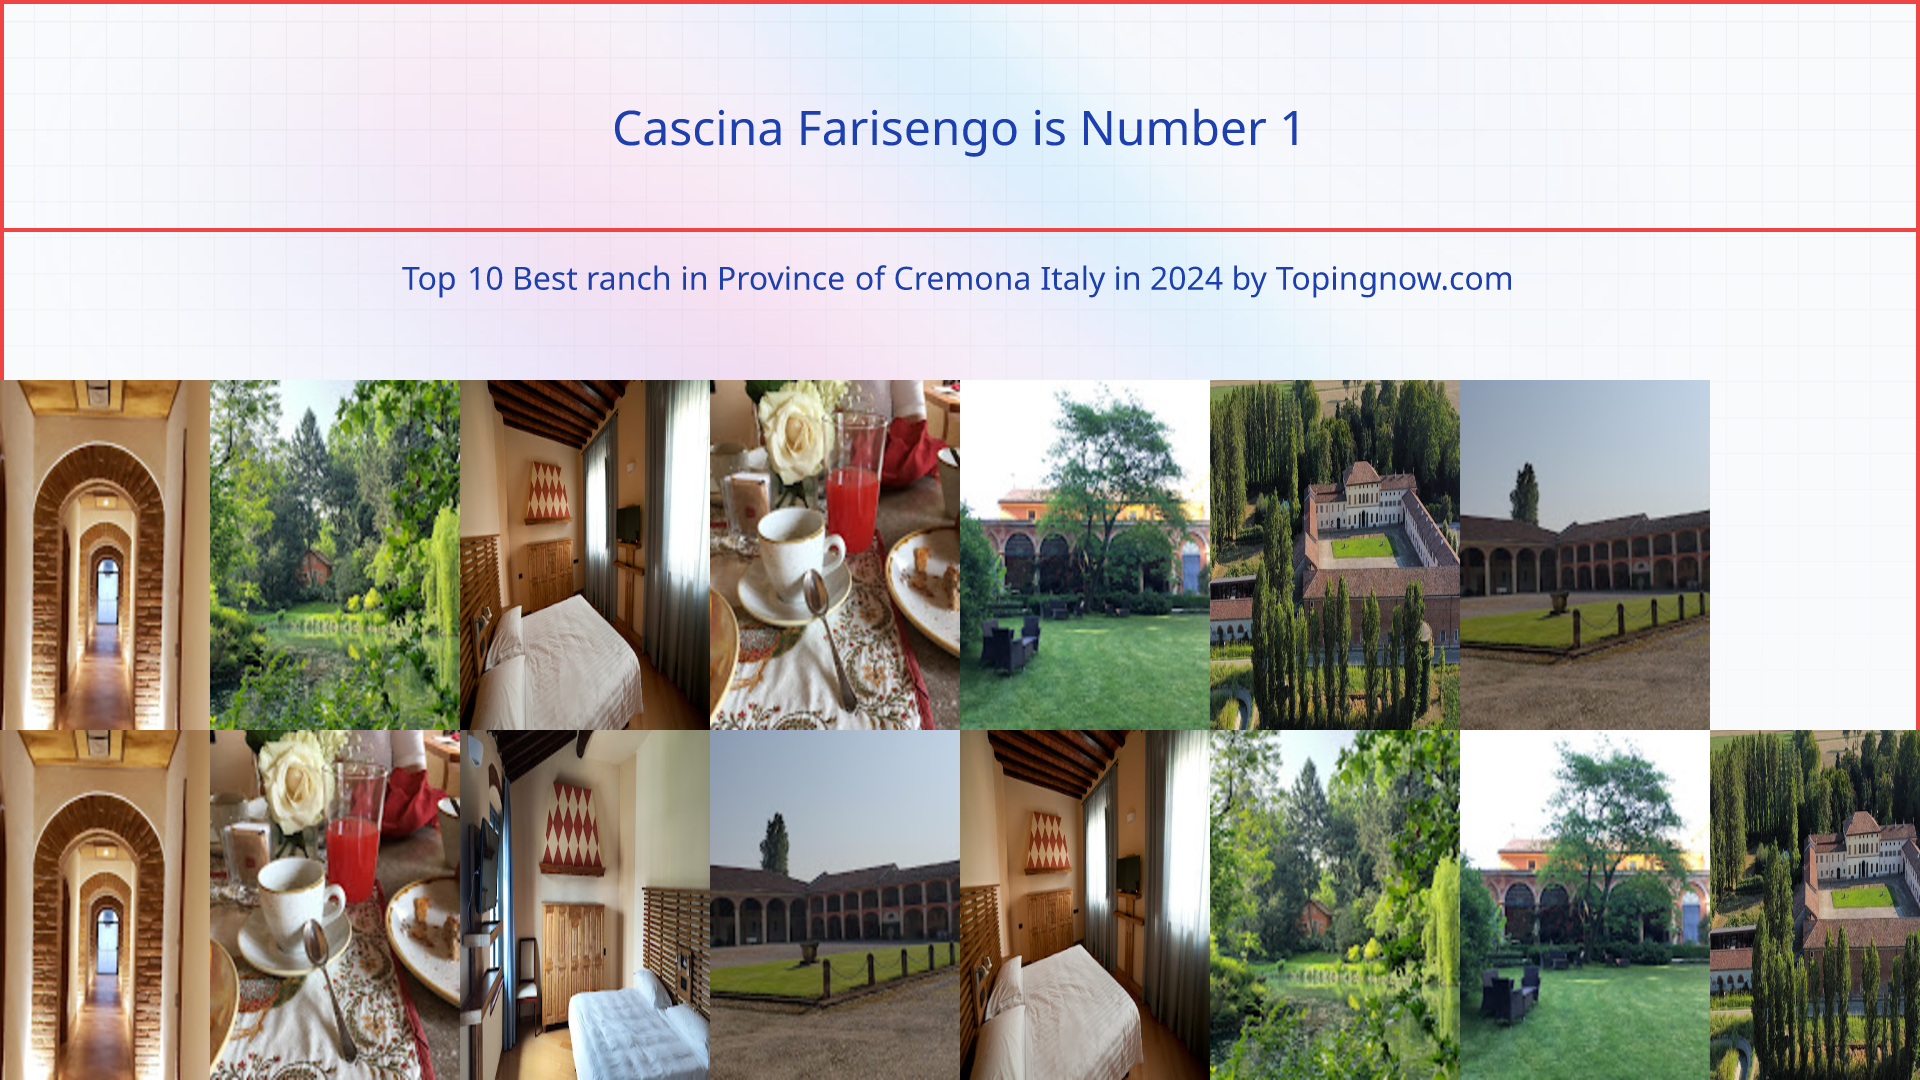 Cascina Farisengo: Top 10 Best ranch in Province of Cremona Italy in 2024